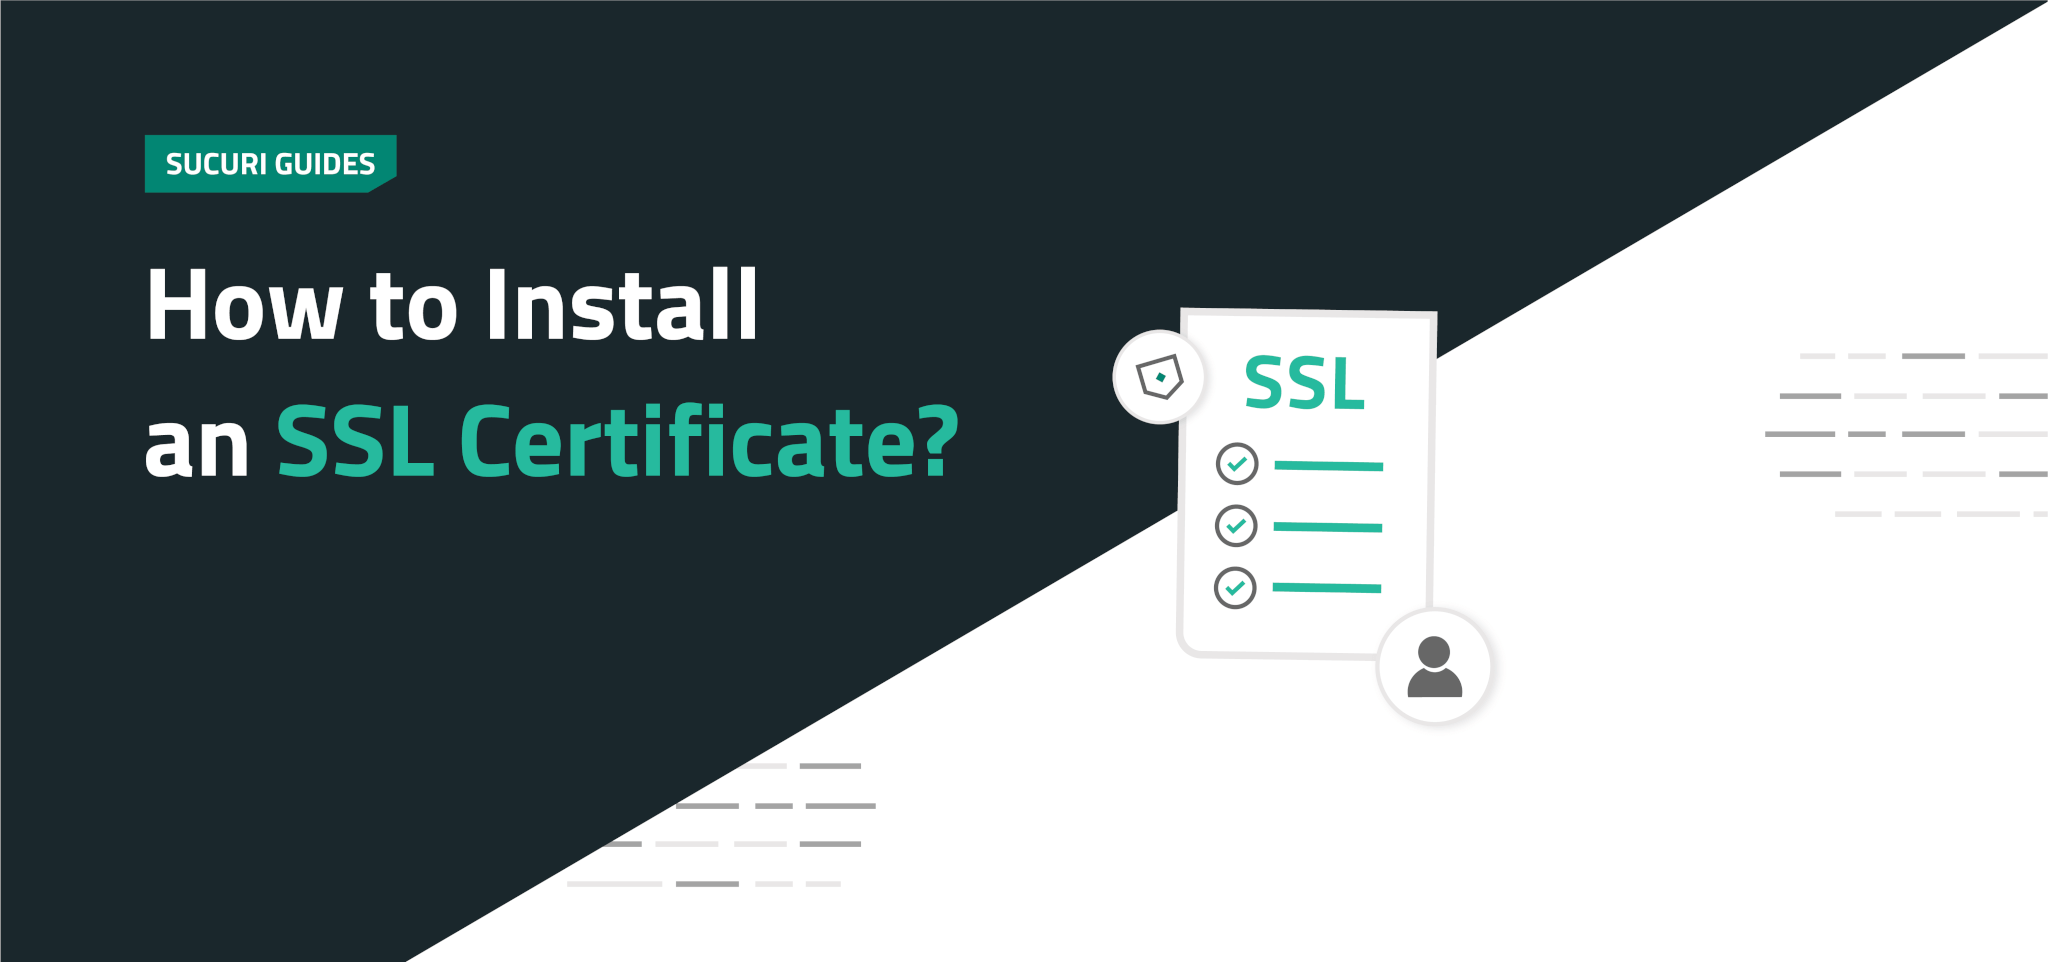 How do I download and install an SSL certificate?